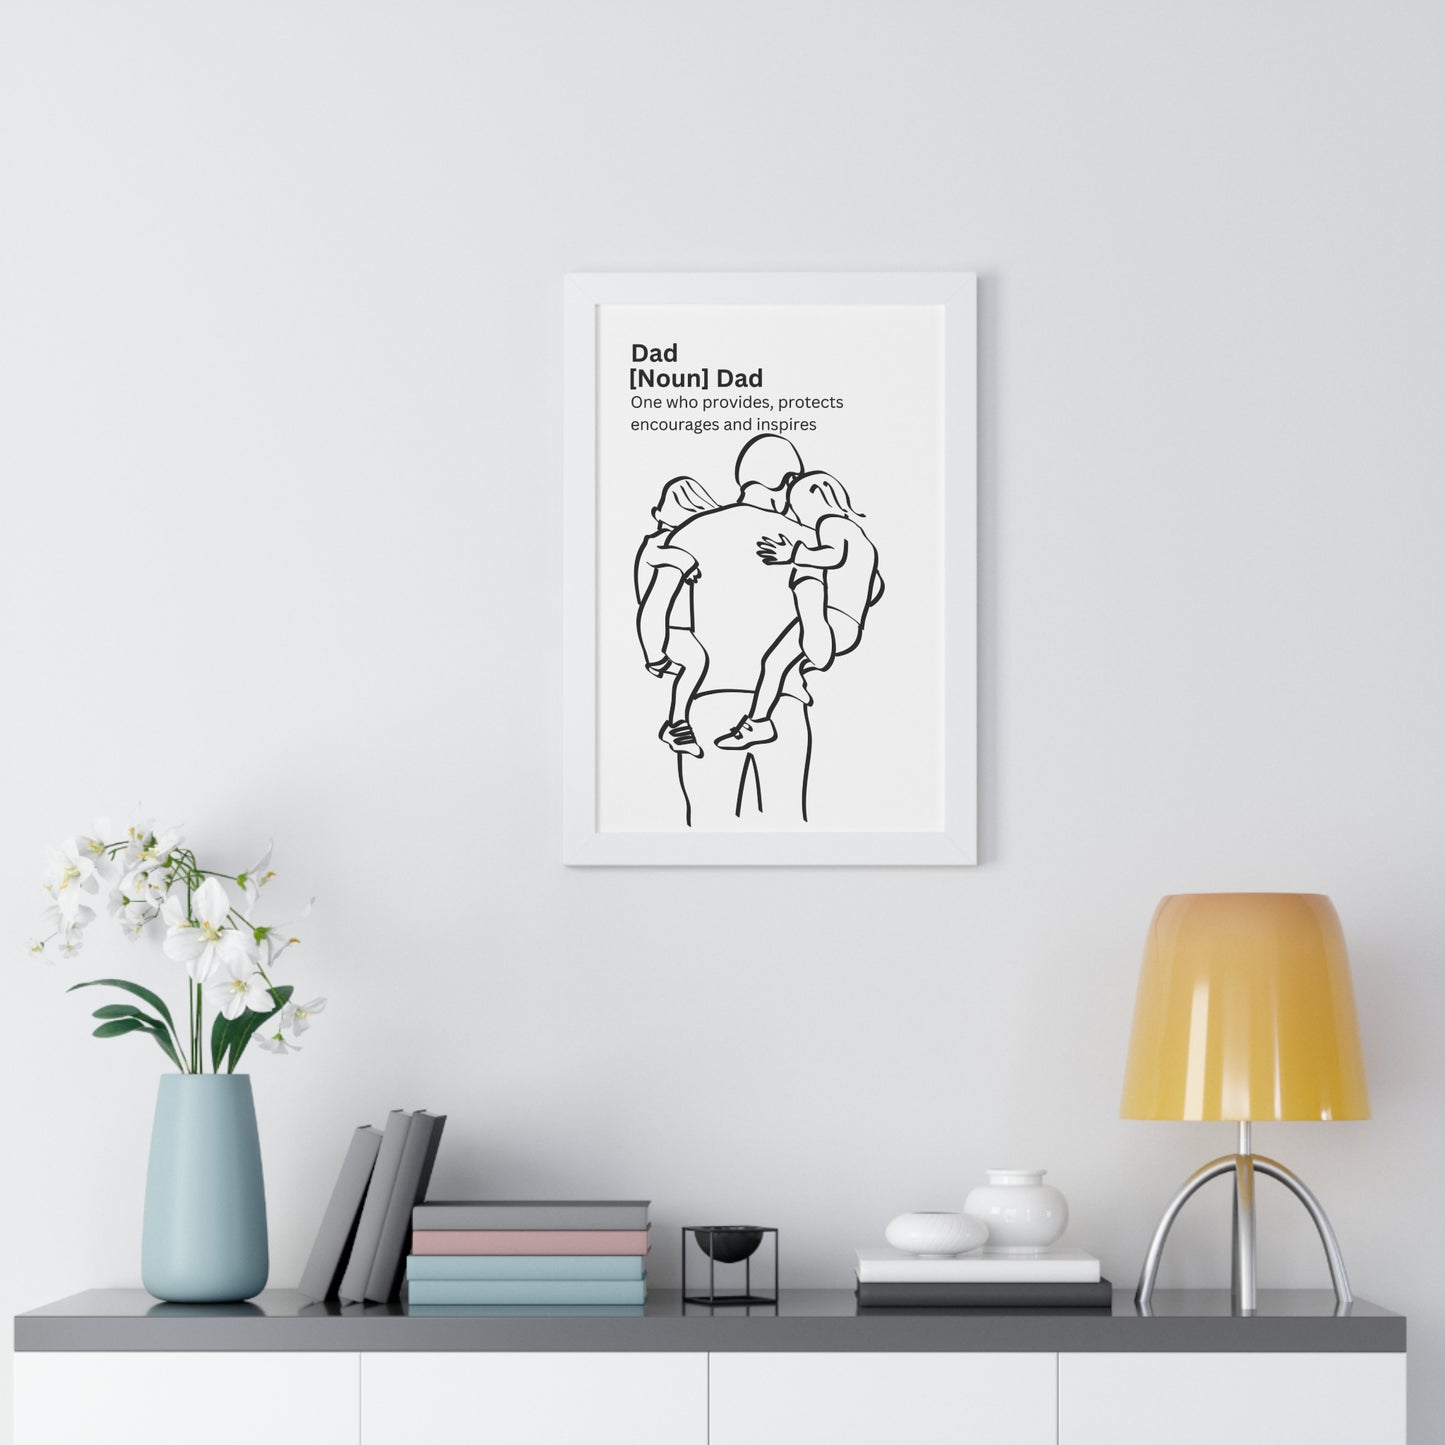 Cherish Every Moment: Dad Framed Poster